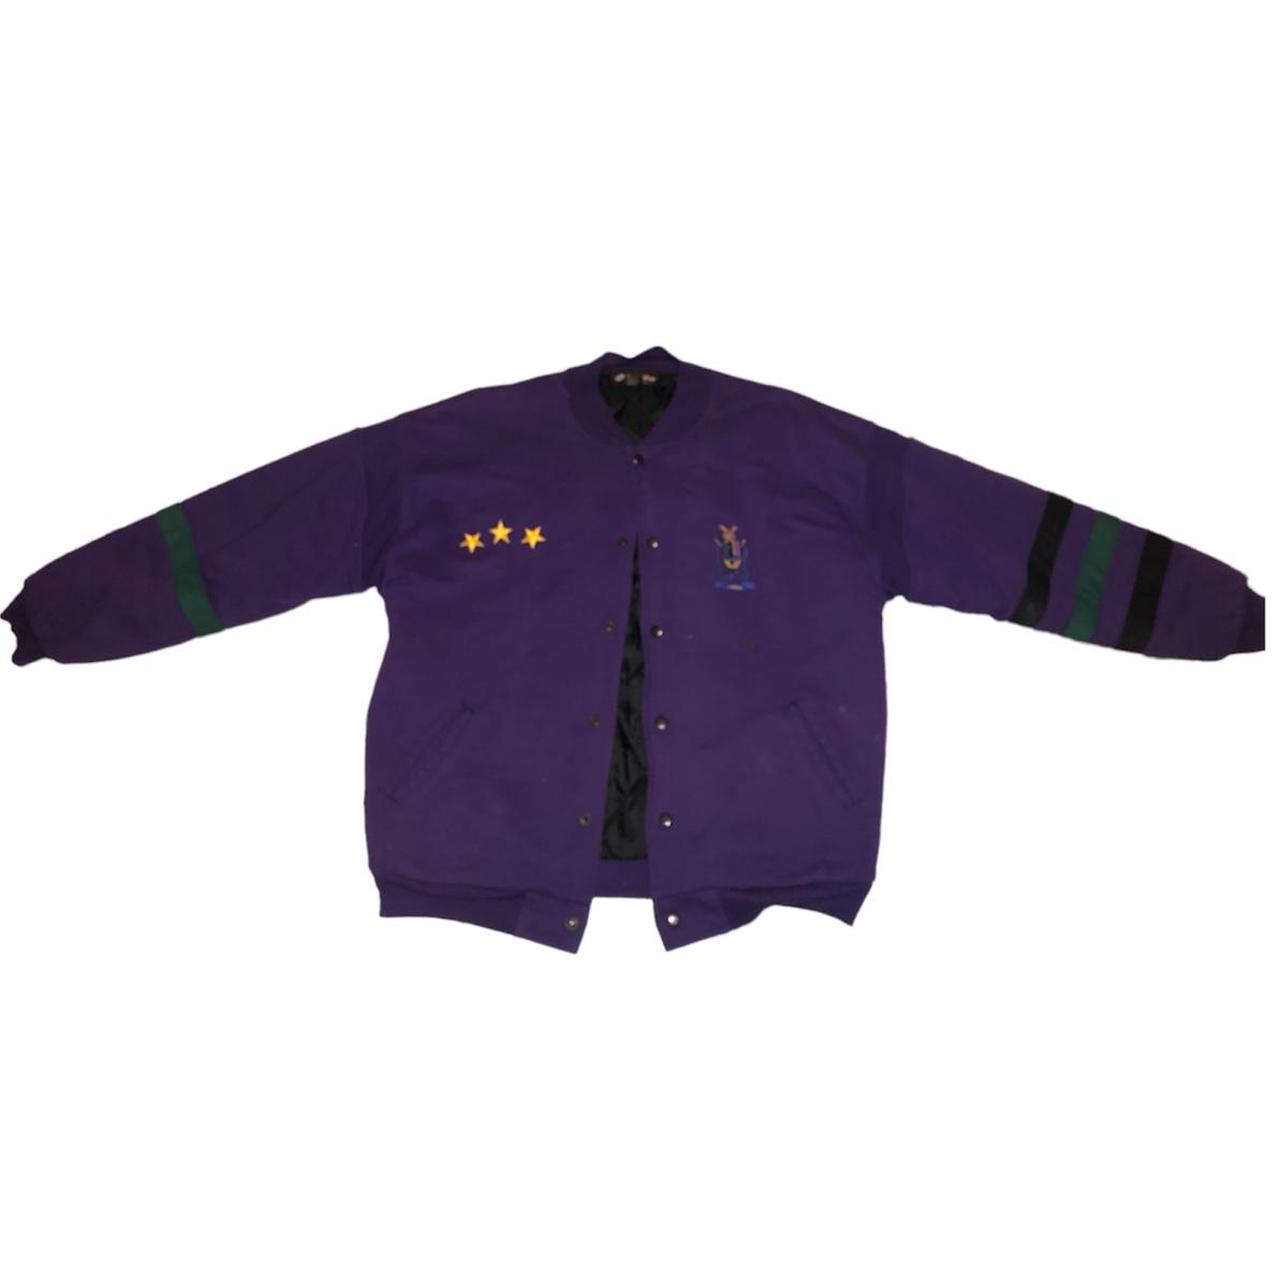 Lotto Men's Purple and Gold Jacket